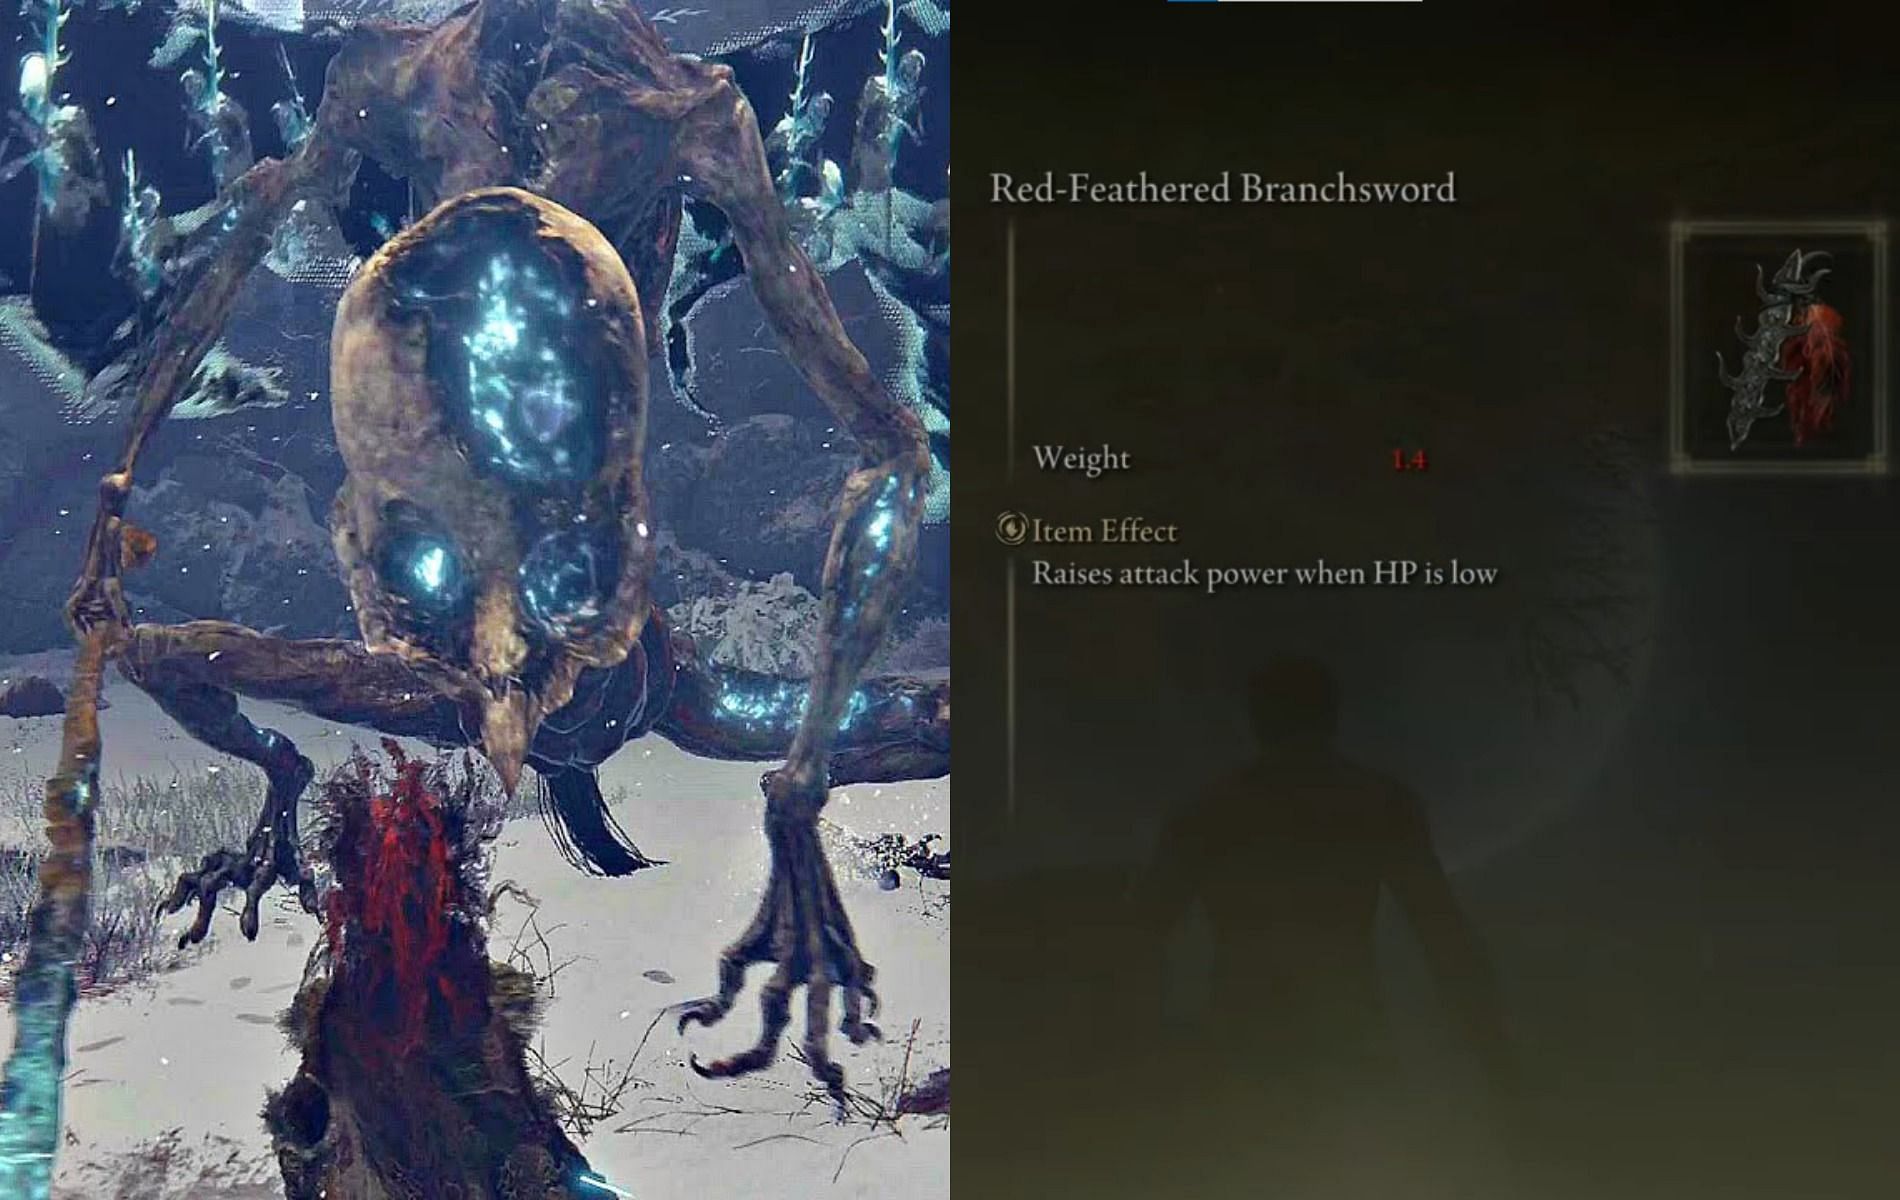 Obtaining the Red-Feathered Branchsword Talisman in Elden Ring (Images via Elden Ring and Reddit)